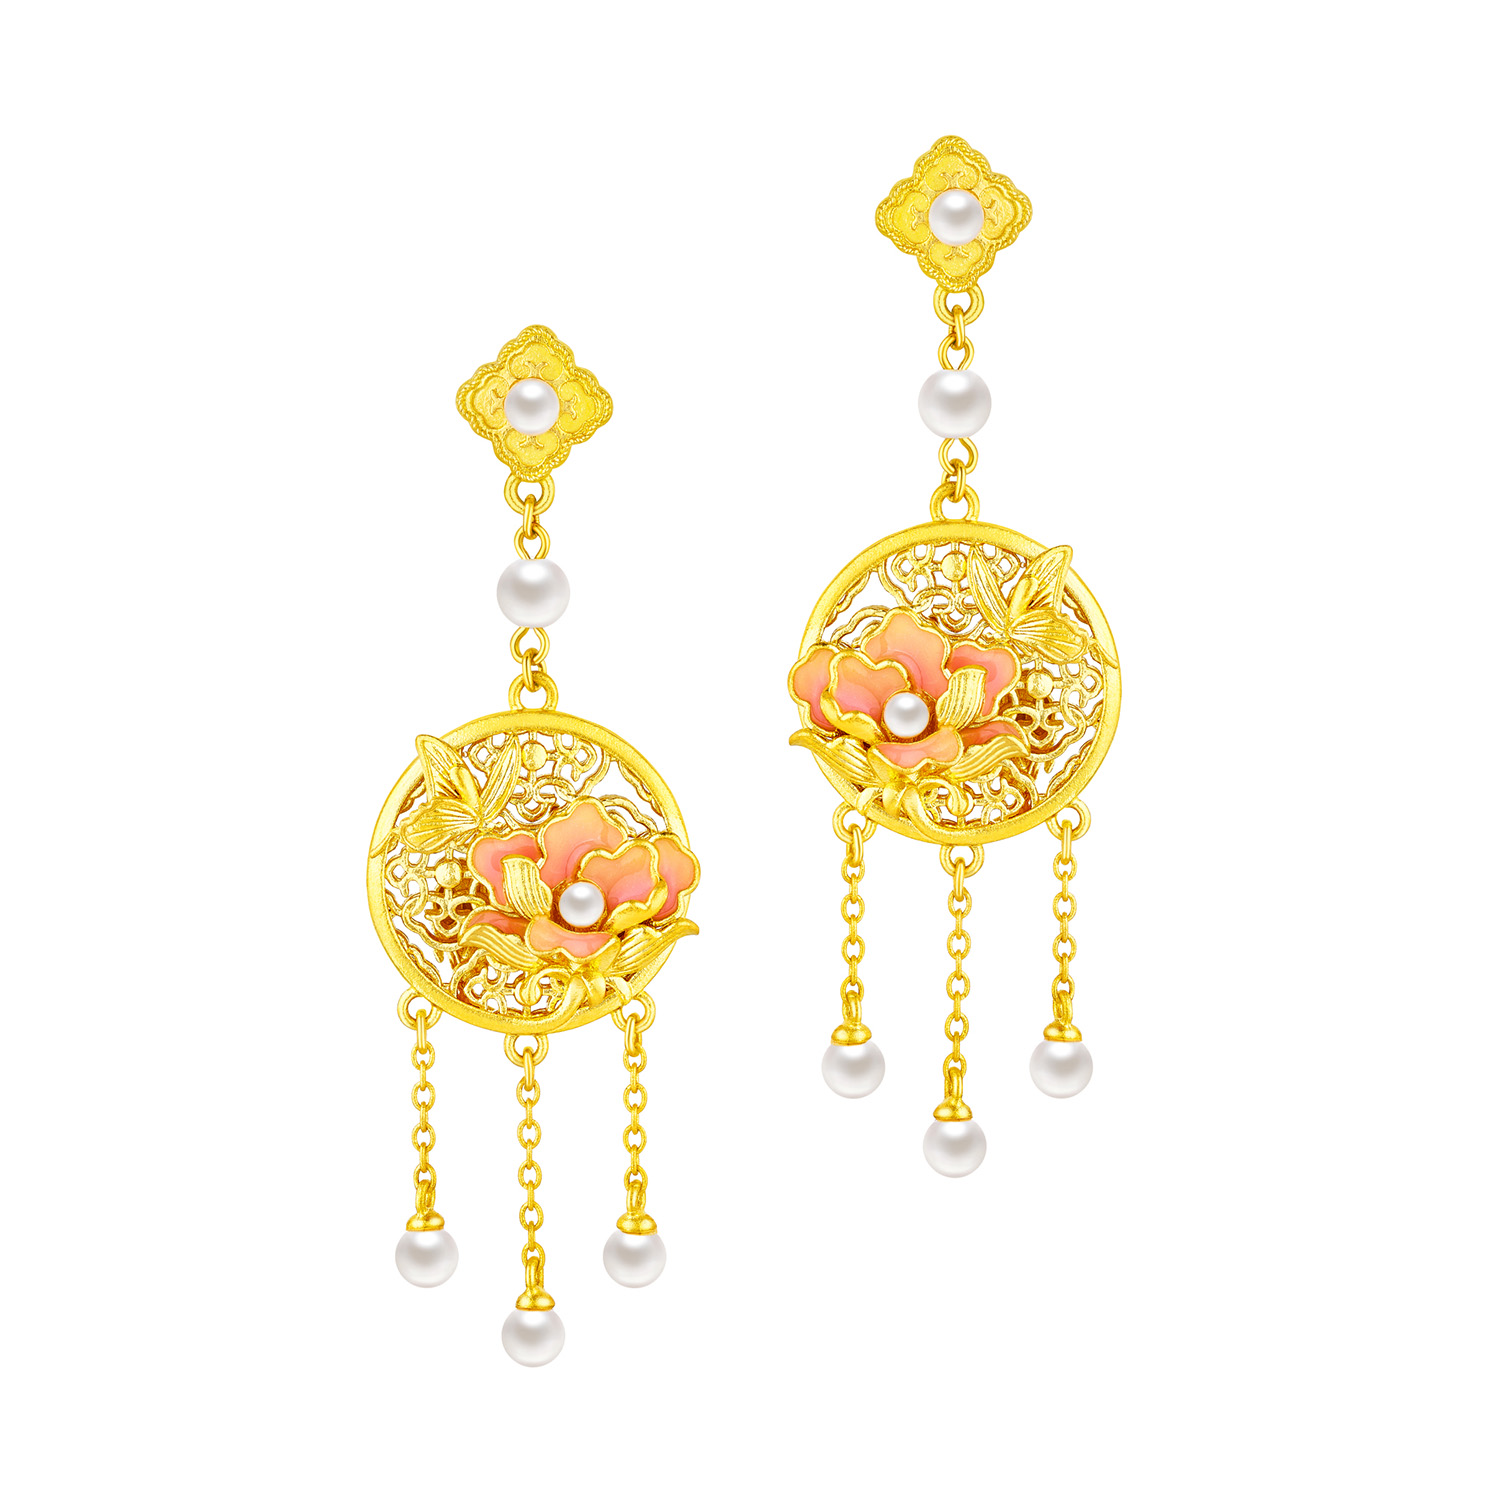 Heirloom Fortune - Charm of Song Dynasty Collection "Butterfly & Cotton Rose" Gold Pearl Earrings